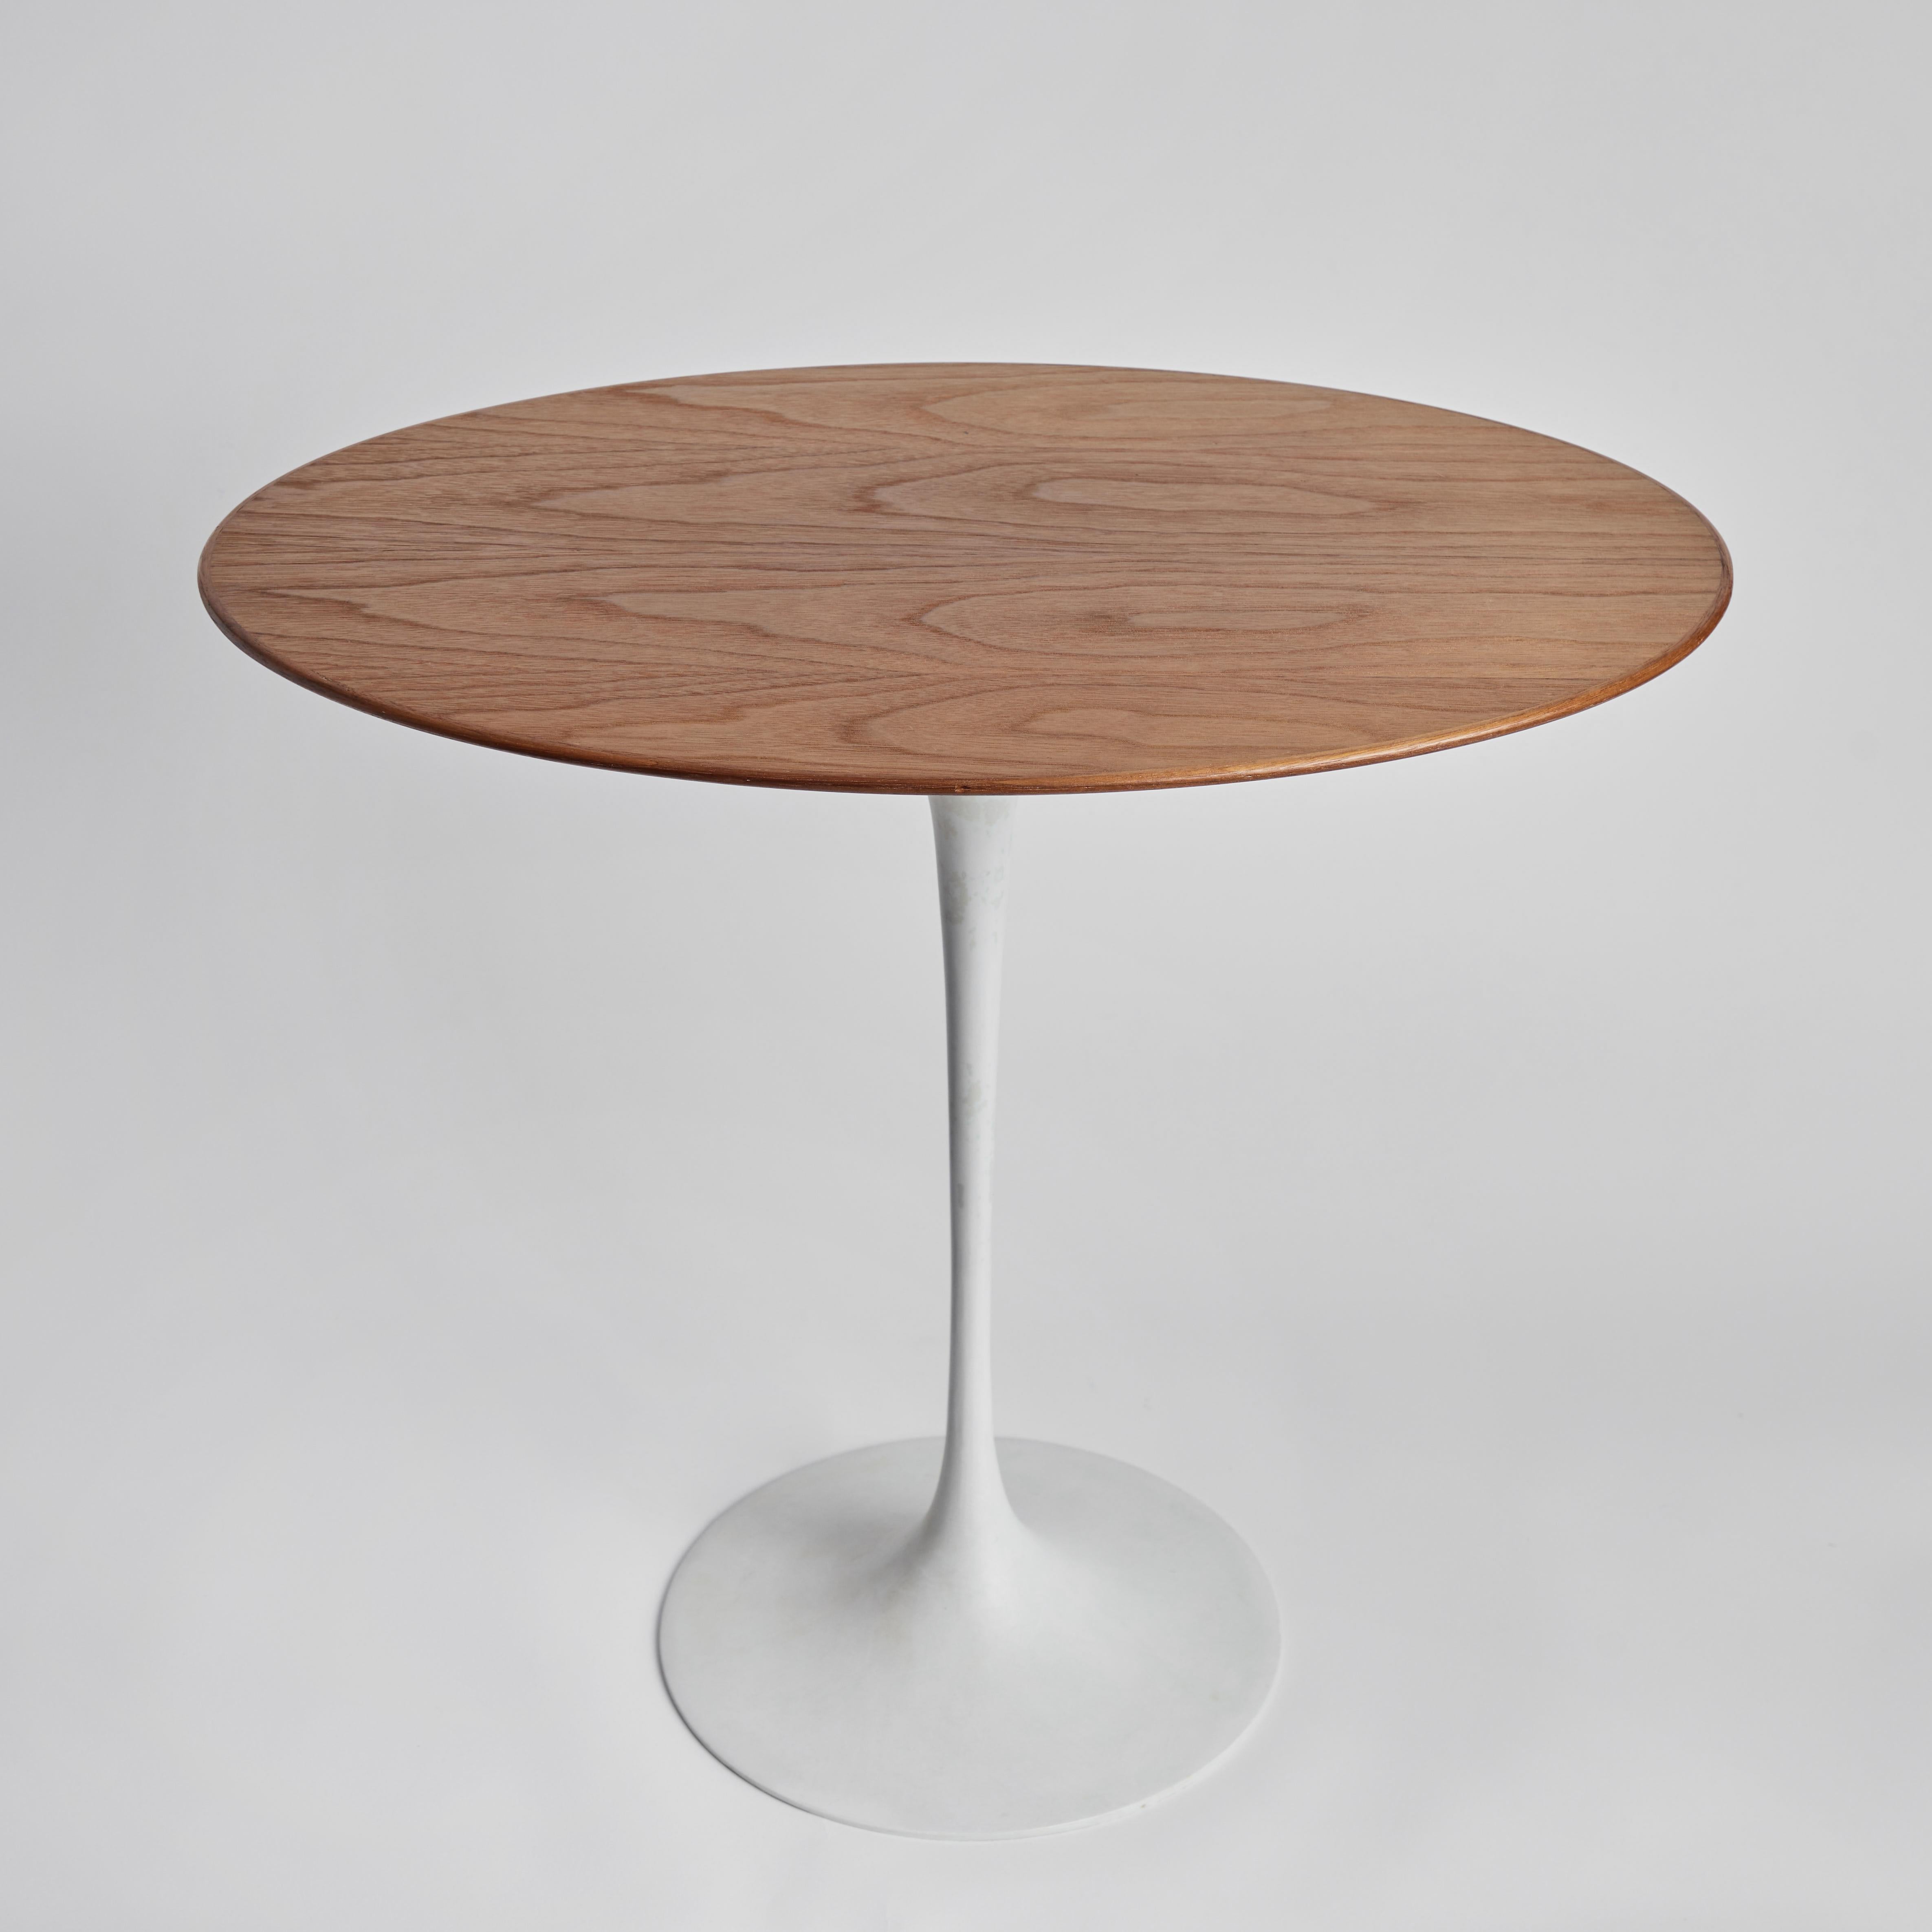 American Rare 1960s Saarinen Oval Walnut Table with Early Knoll Label For Sale